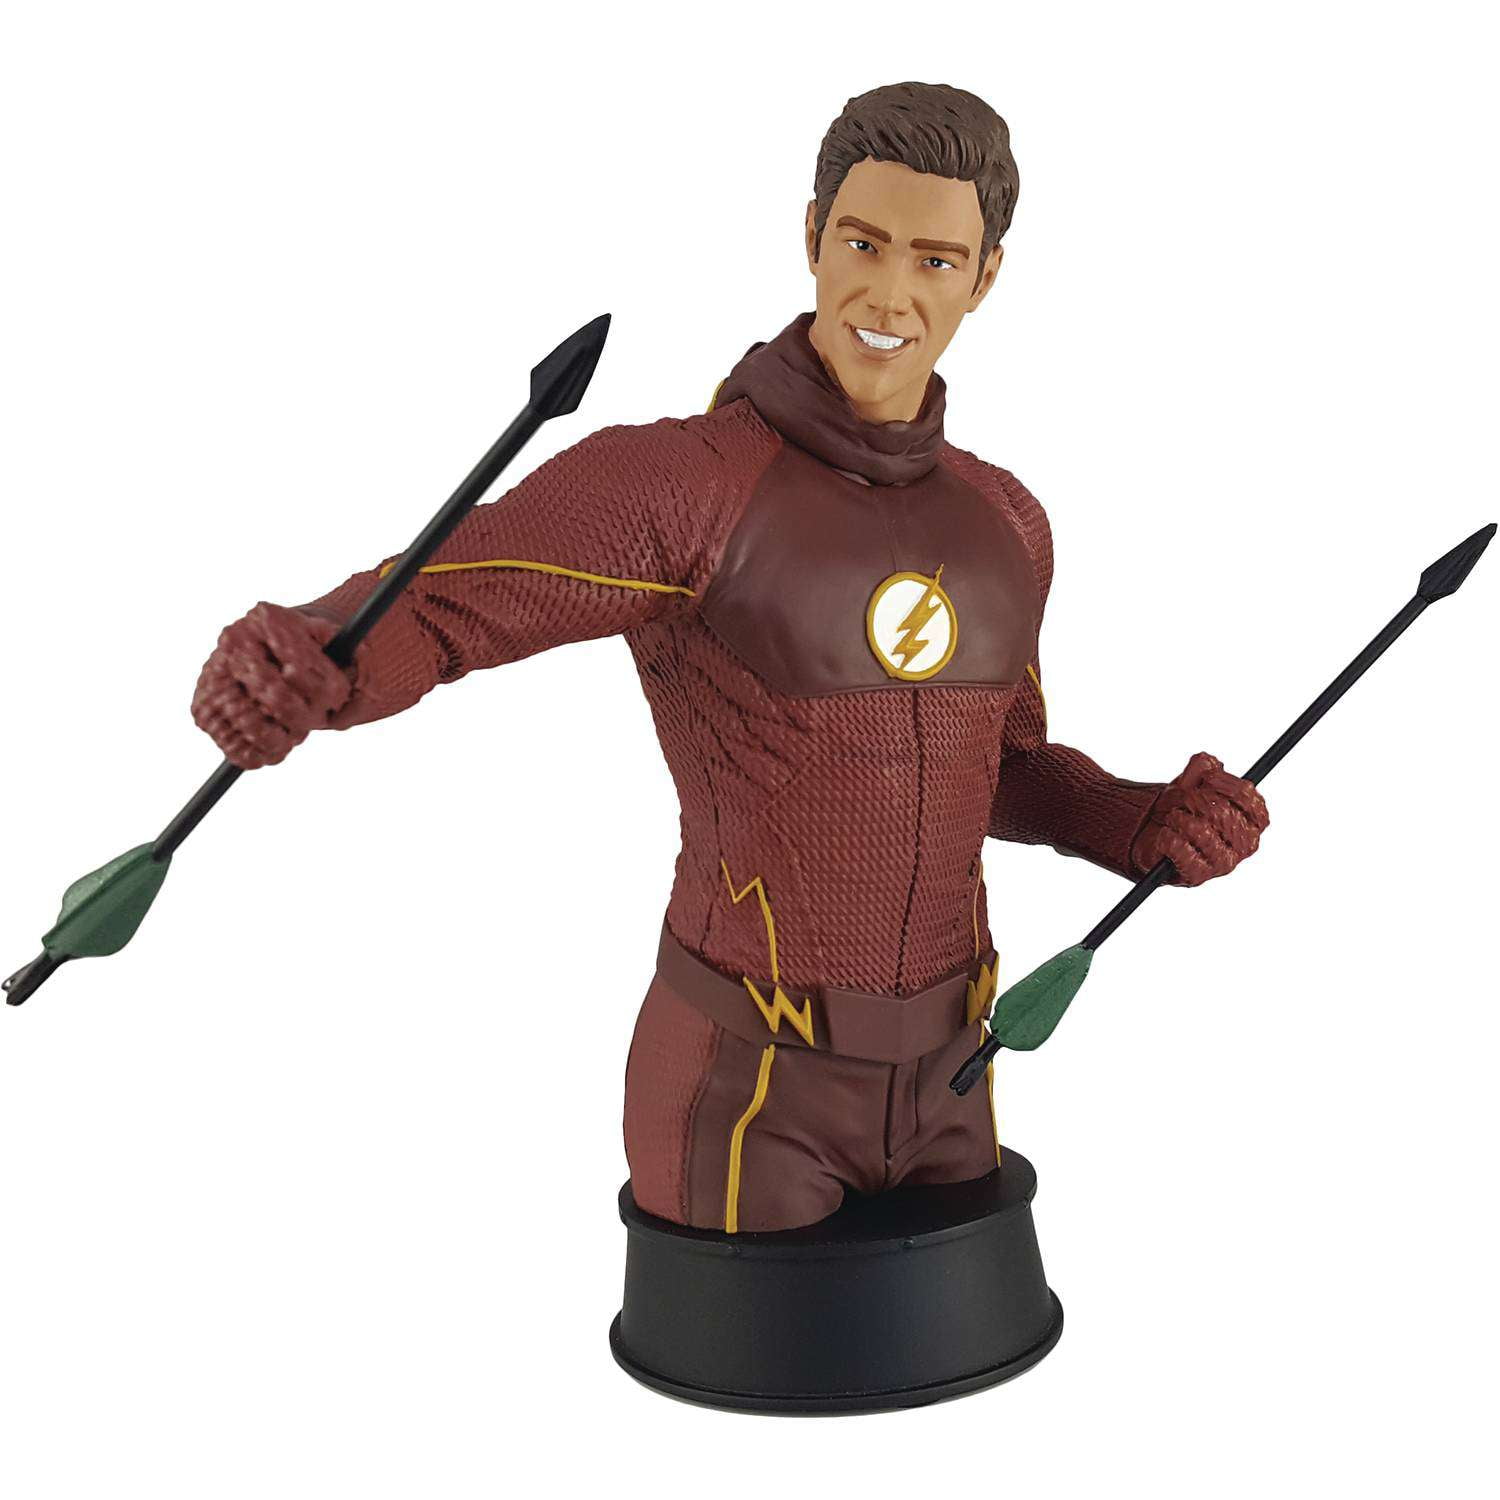 Details about   XXRAY DC Comics The Flash 4D 9.5 Inch Vinyl Action Figure by Jason Freeny 